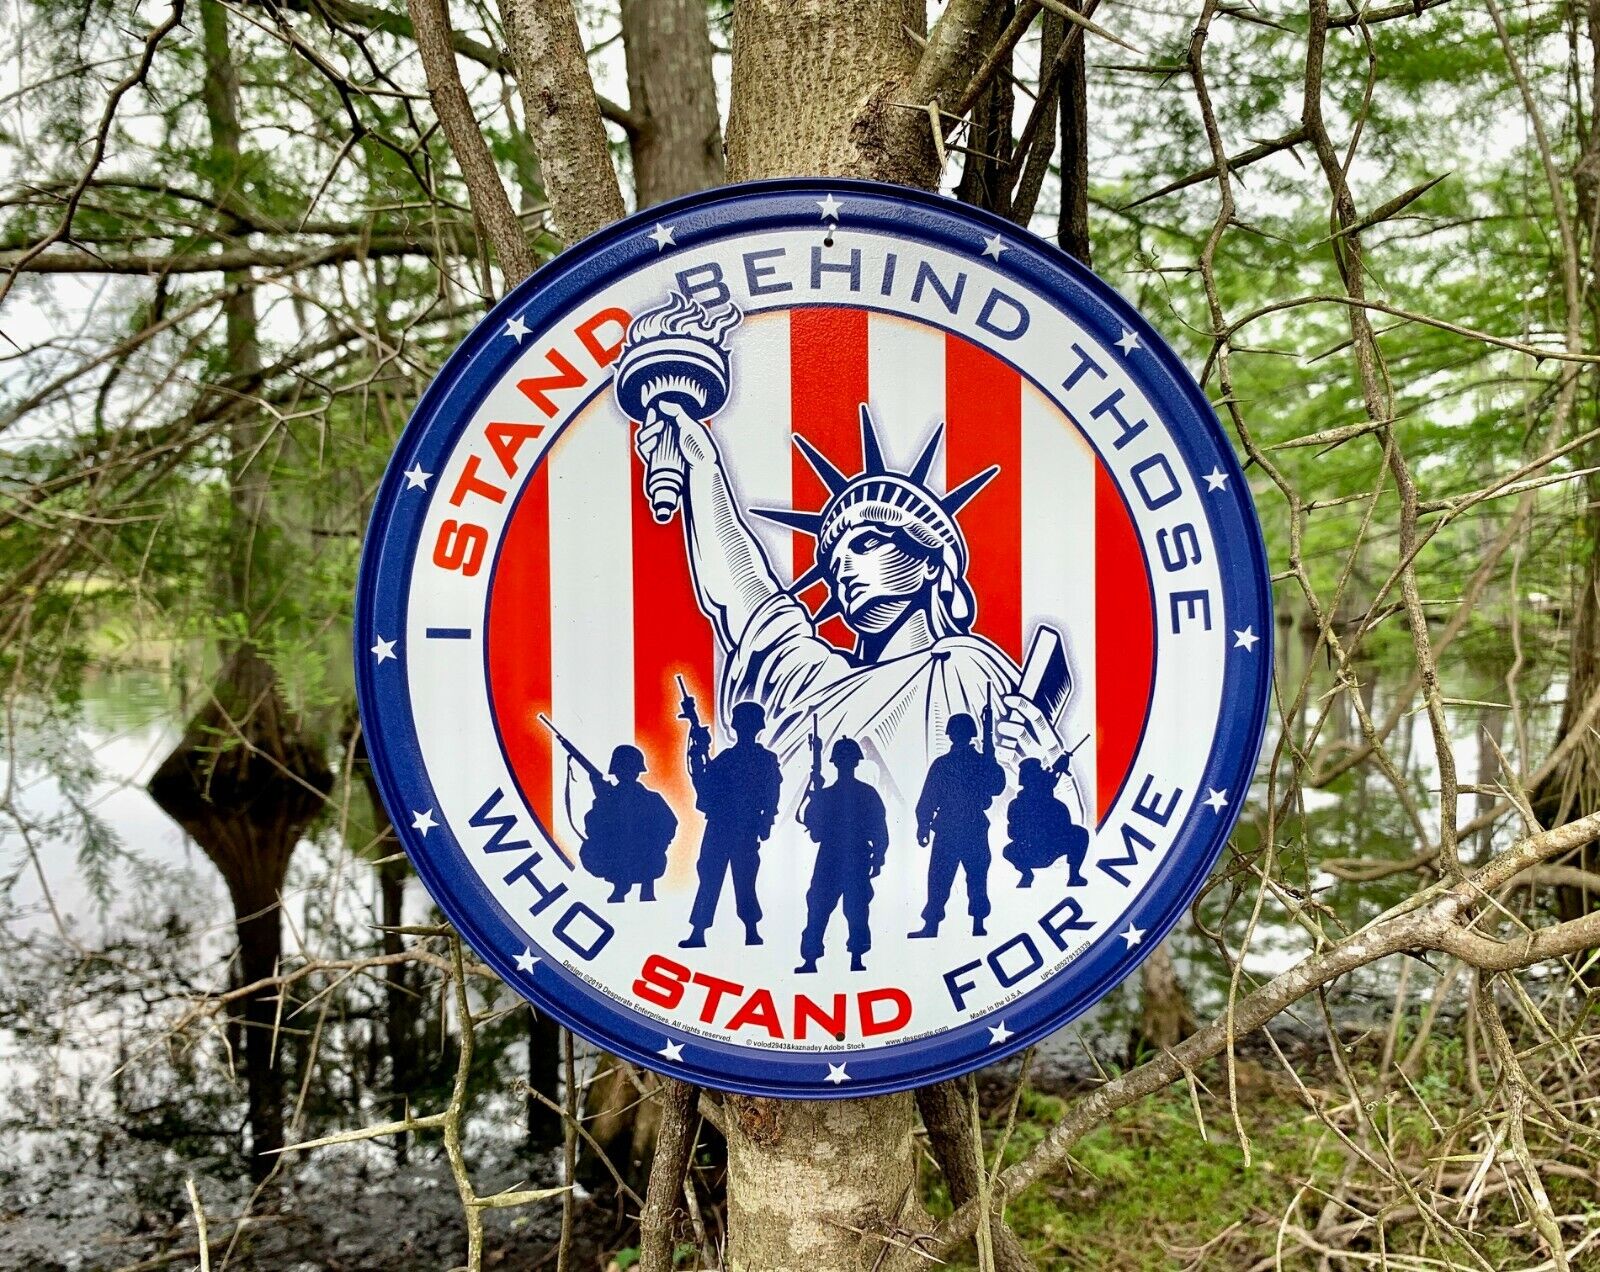 I Stand For Metal Tin Sign Wall Decor Vintage Garage Support Our Troops Shop USA